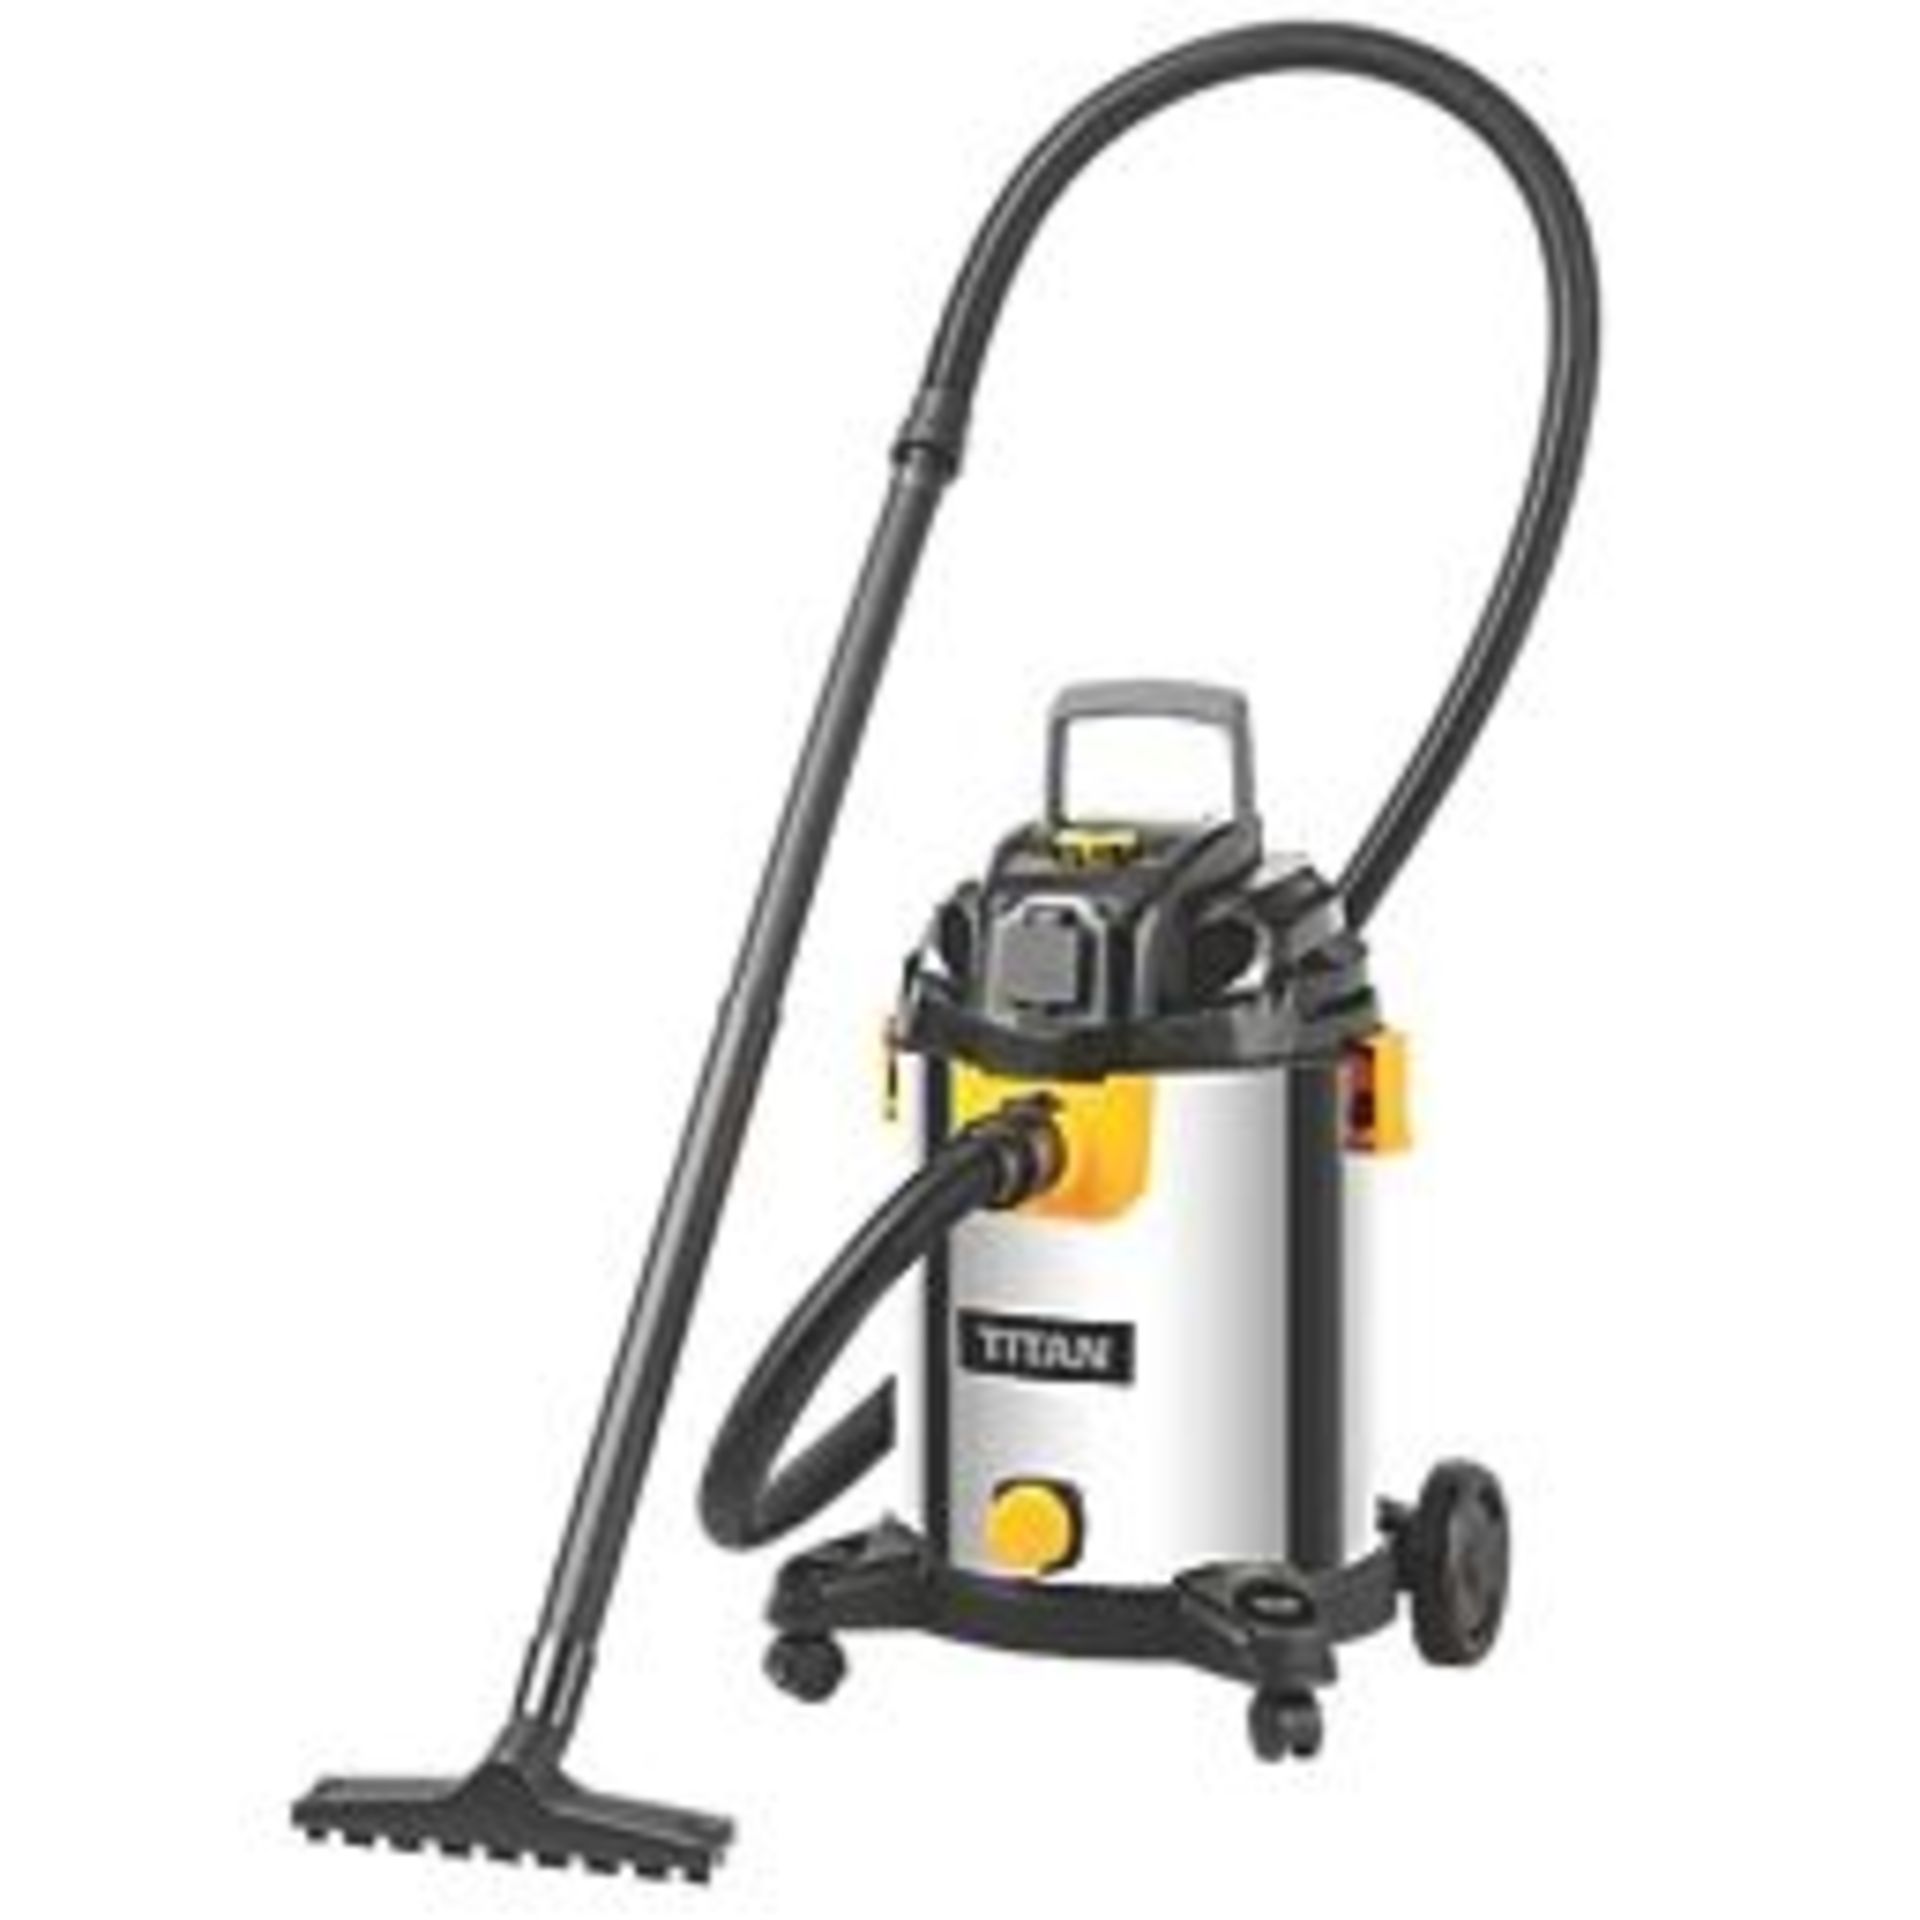 TITAN TTB776VAC 1400W 30LTR WET & DRY VACUUM 220-240V. - P4. Wet and dry vacuum with power take-